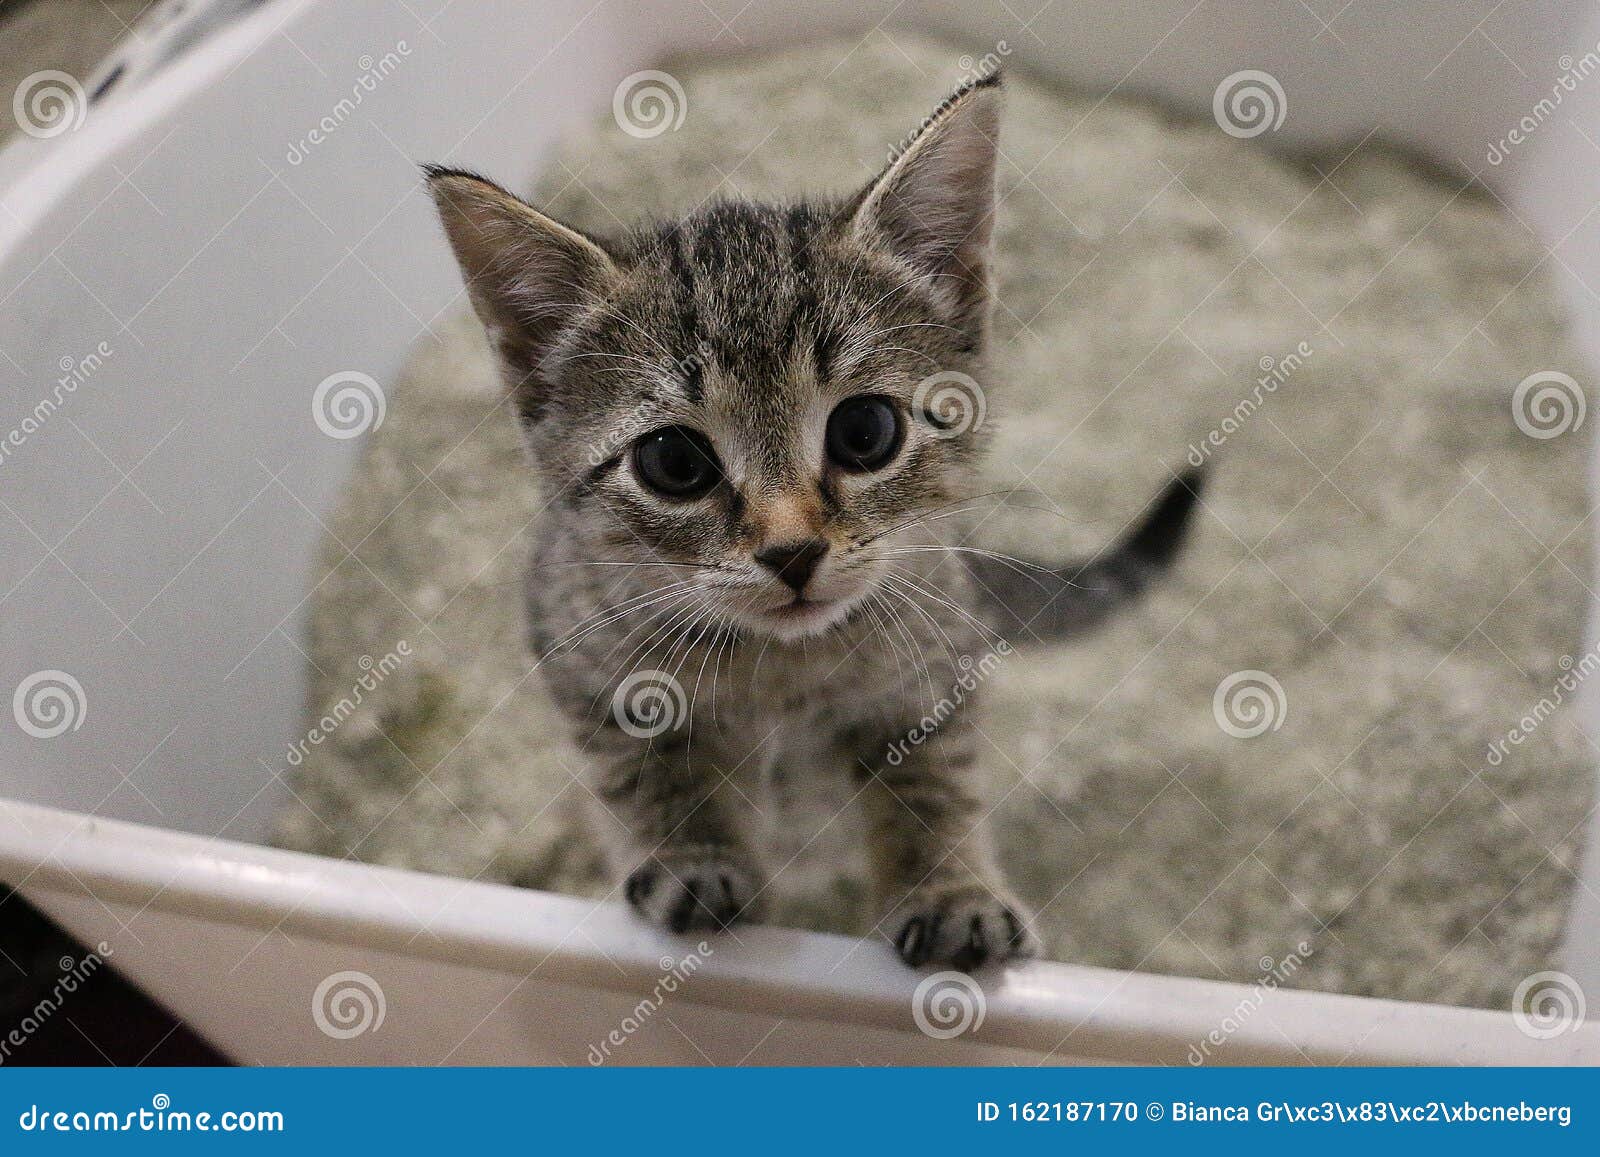 beautiful small gray kitten is sitting in the sand in the cat toilett and looking up